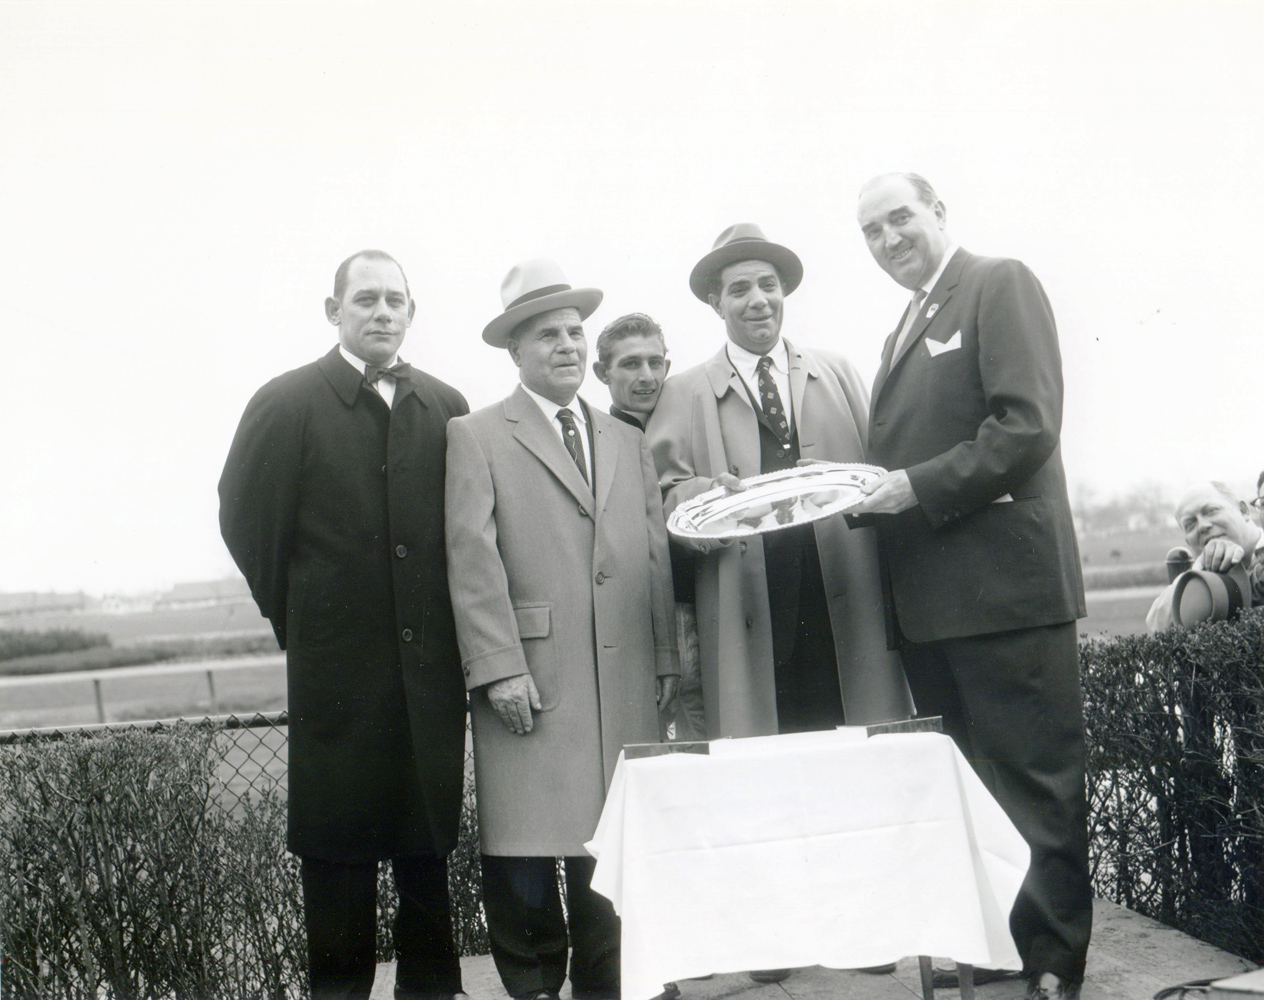 Frank Martin, Mr. Dolce, jockey Ray Broussard, Emil Dolce, and Queens Borough President John T. Clancy at the 1959 Wood Memorial trophy presentation at Jamaica (Keeneland Library Morgan Collection/Museum Collection)